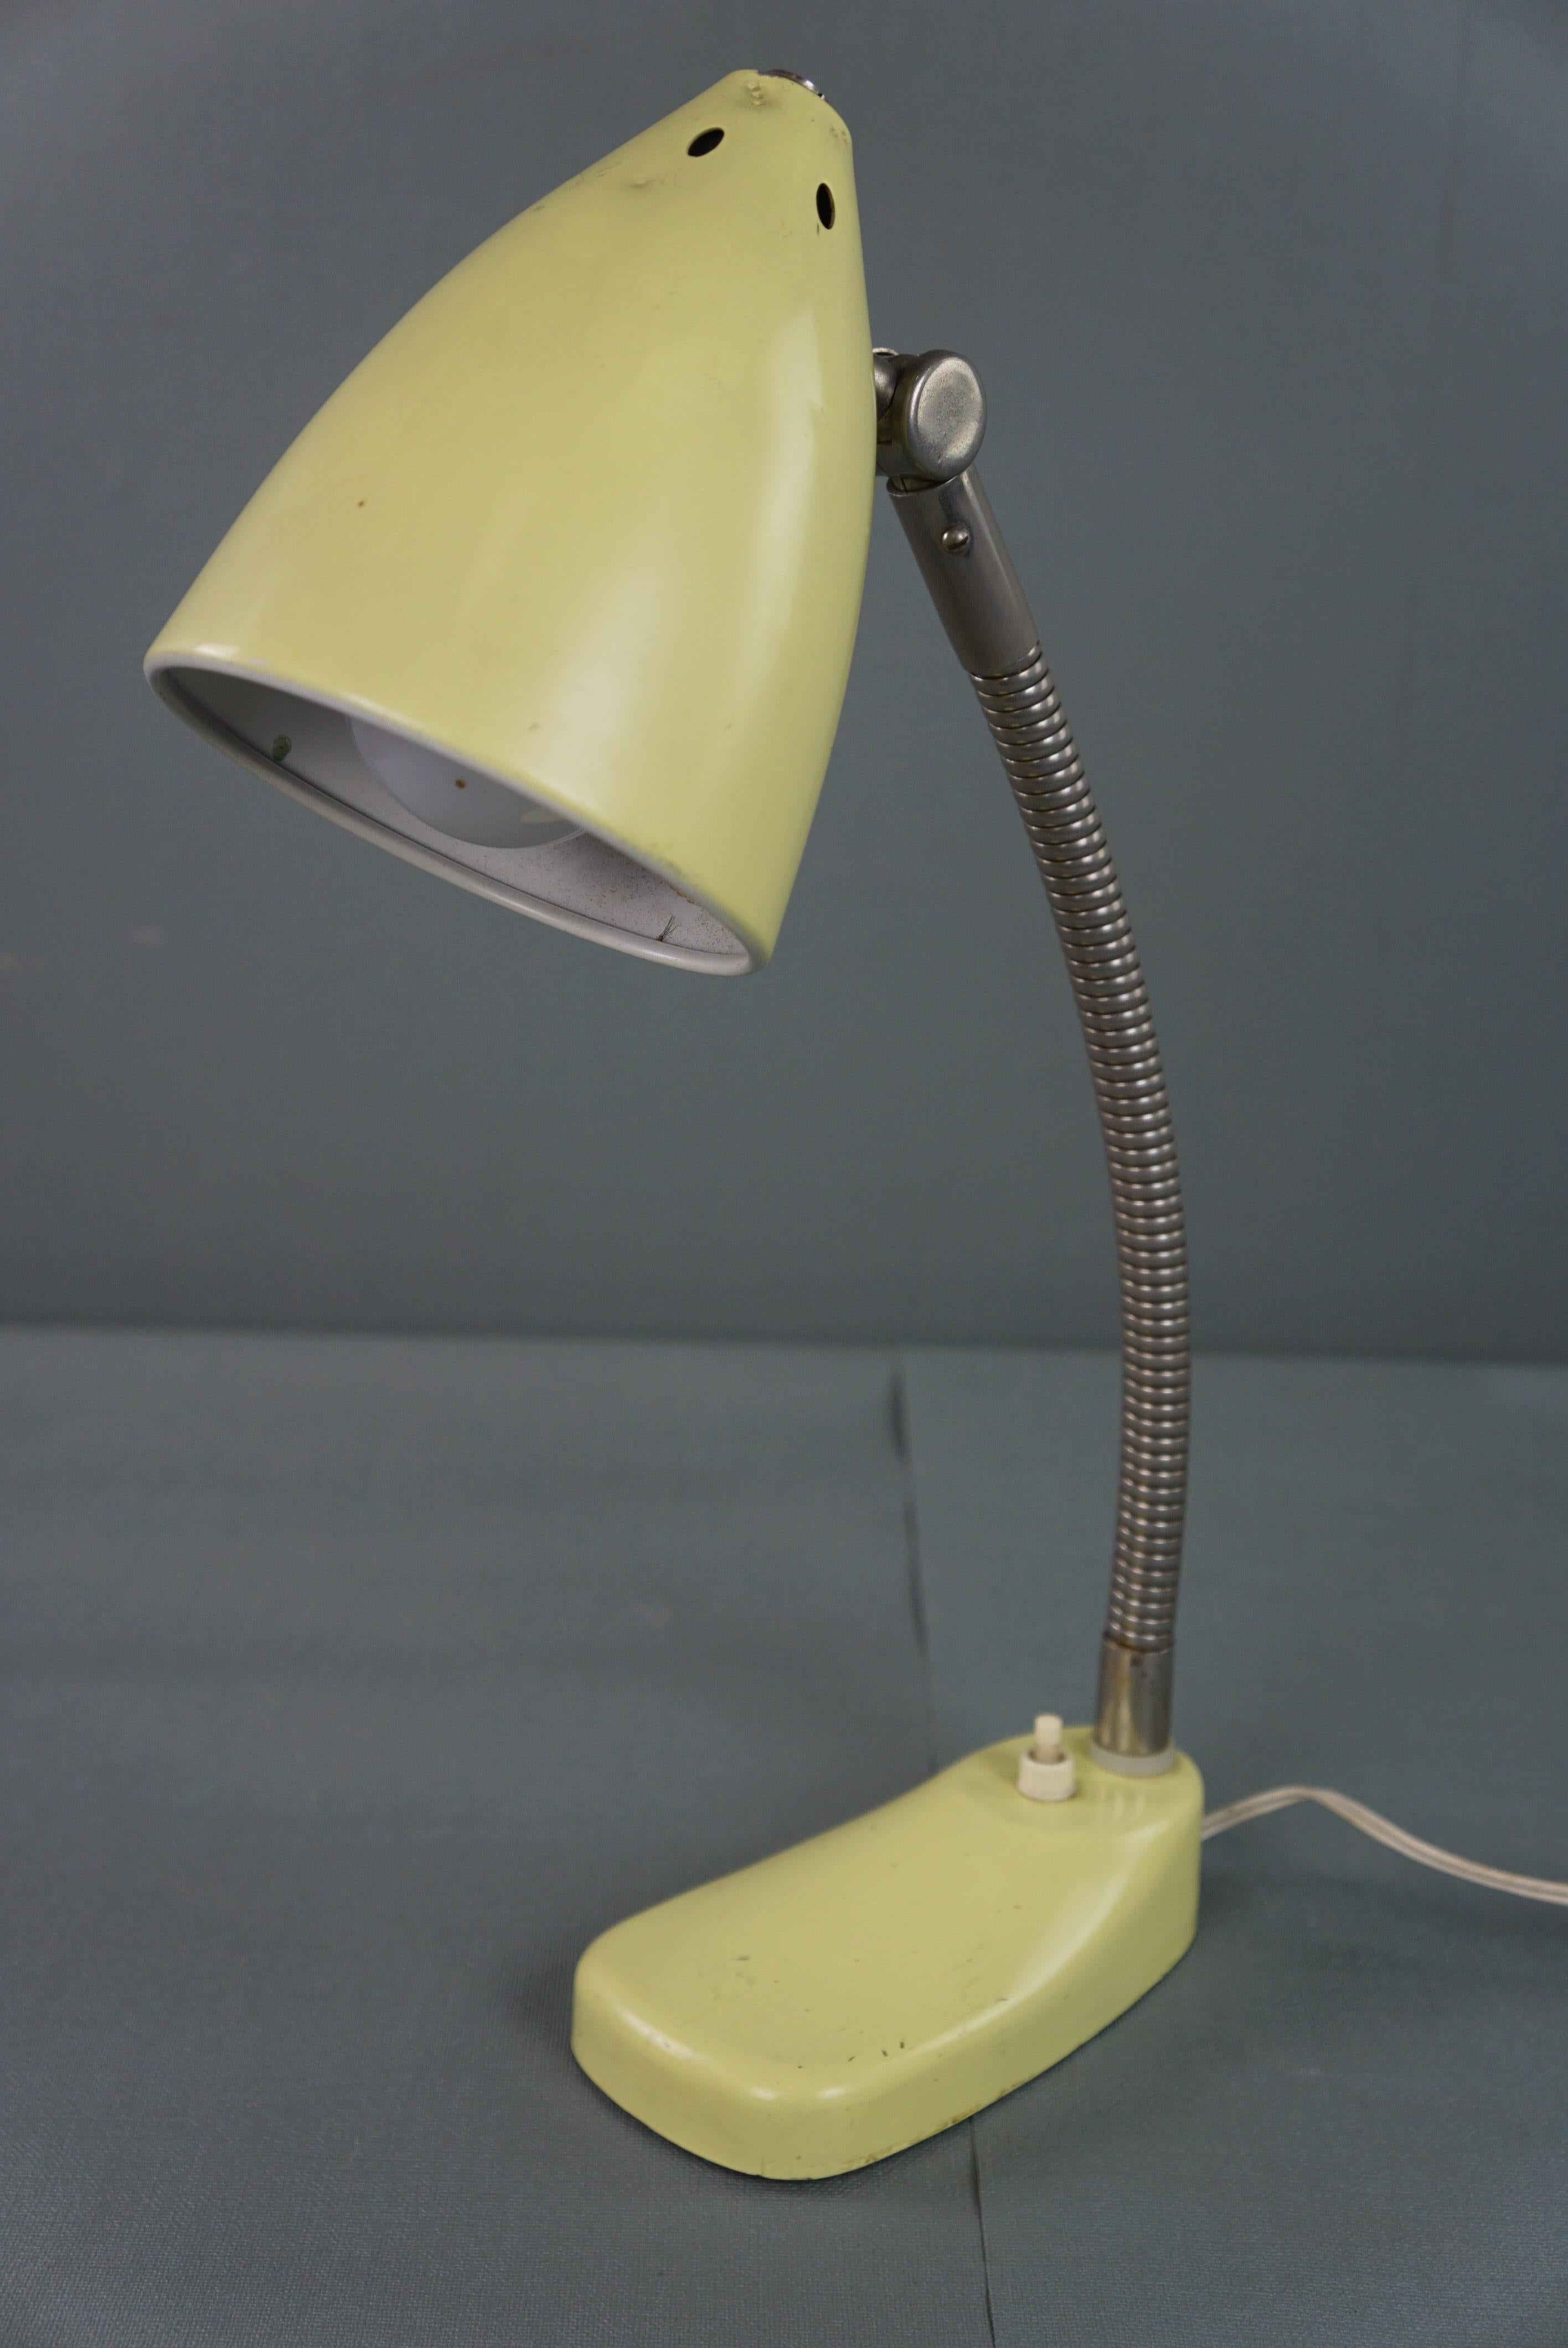 Offered is this lovely yellow metal vintage 1960s design lamp/desk lamp. This vintage desk lamp is perfect for use in the home, office, or bedroom. The neck is bendable, allowing you to always have the right angle of illumination. The lamp can be